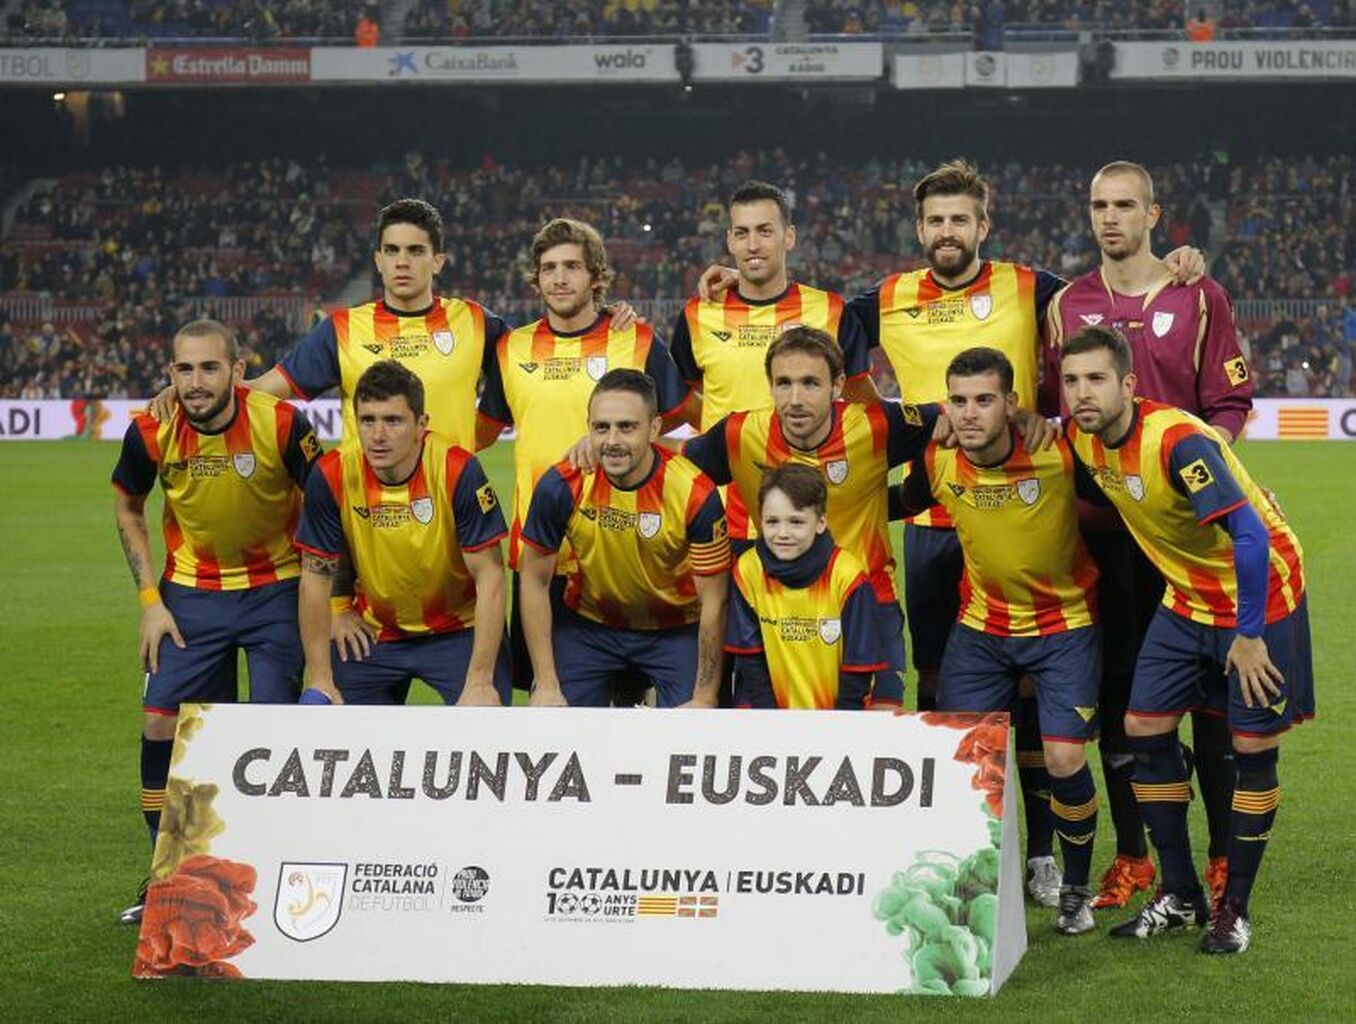 Valladolid stops its players from responding to Catalonia's call